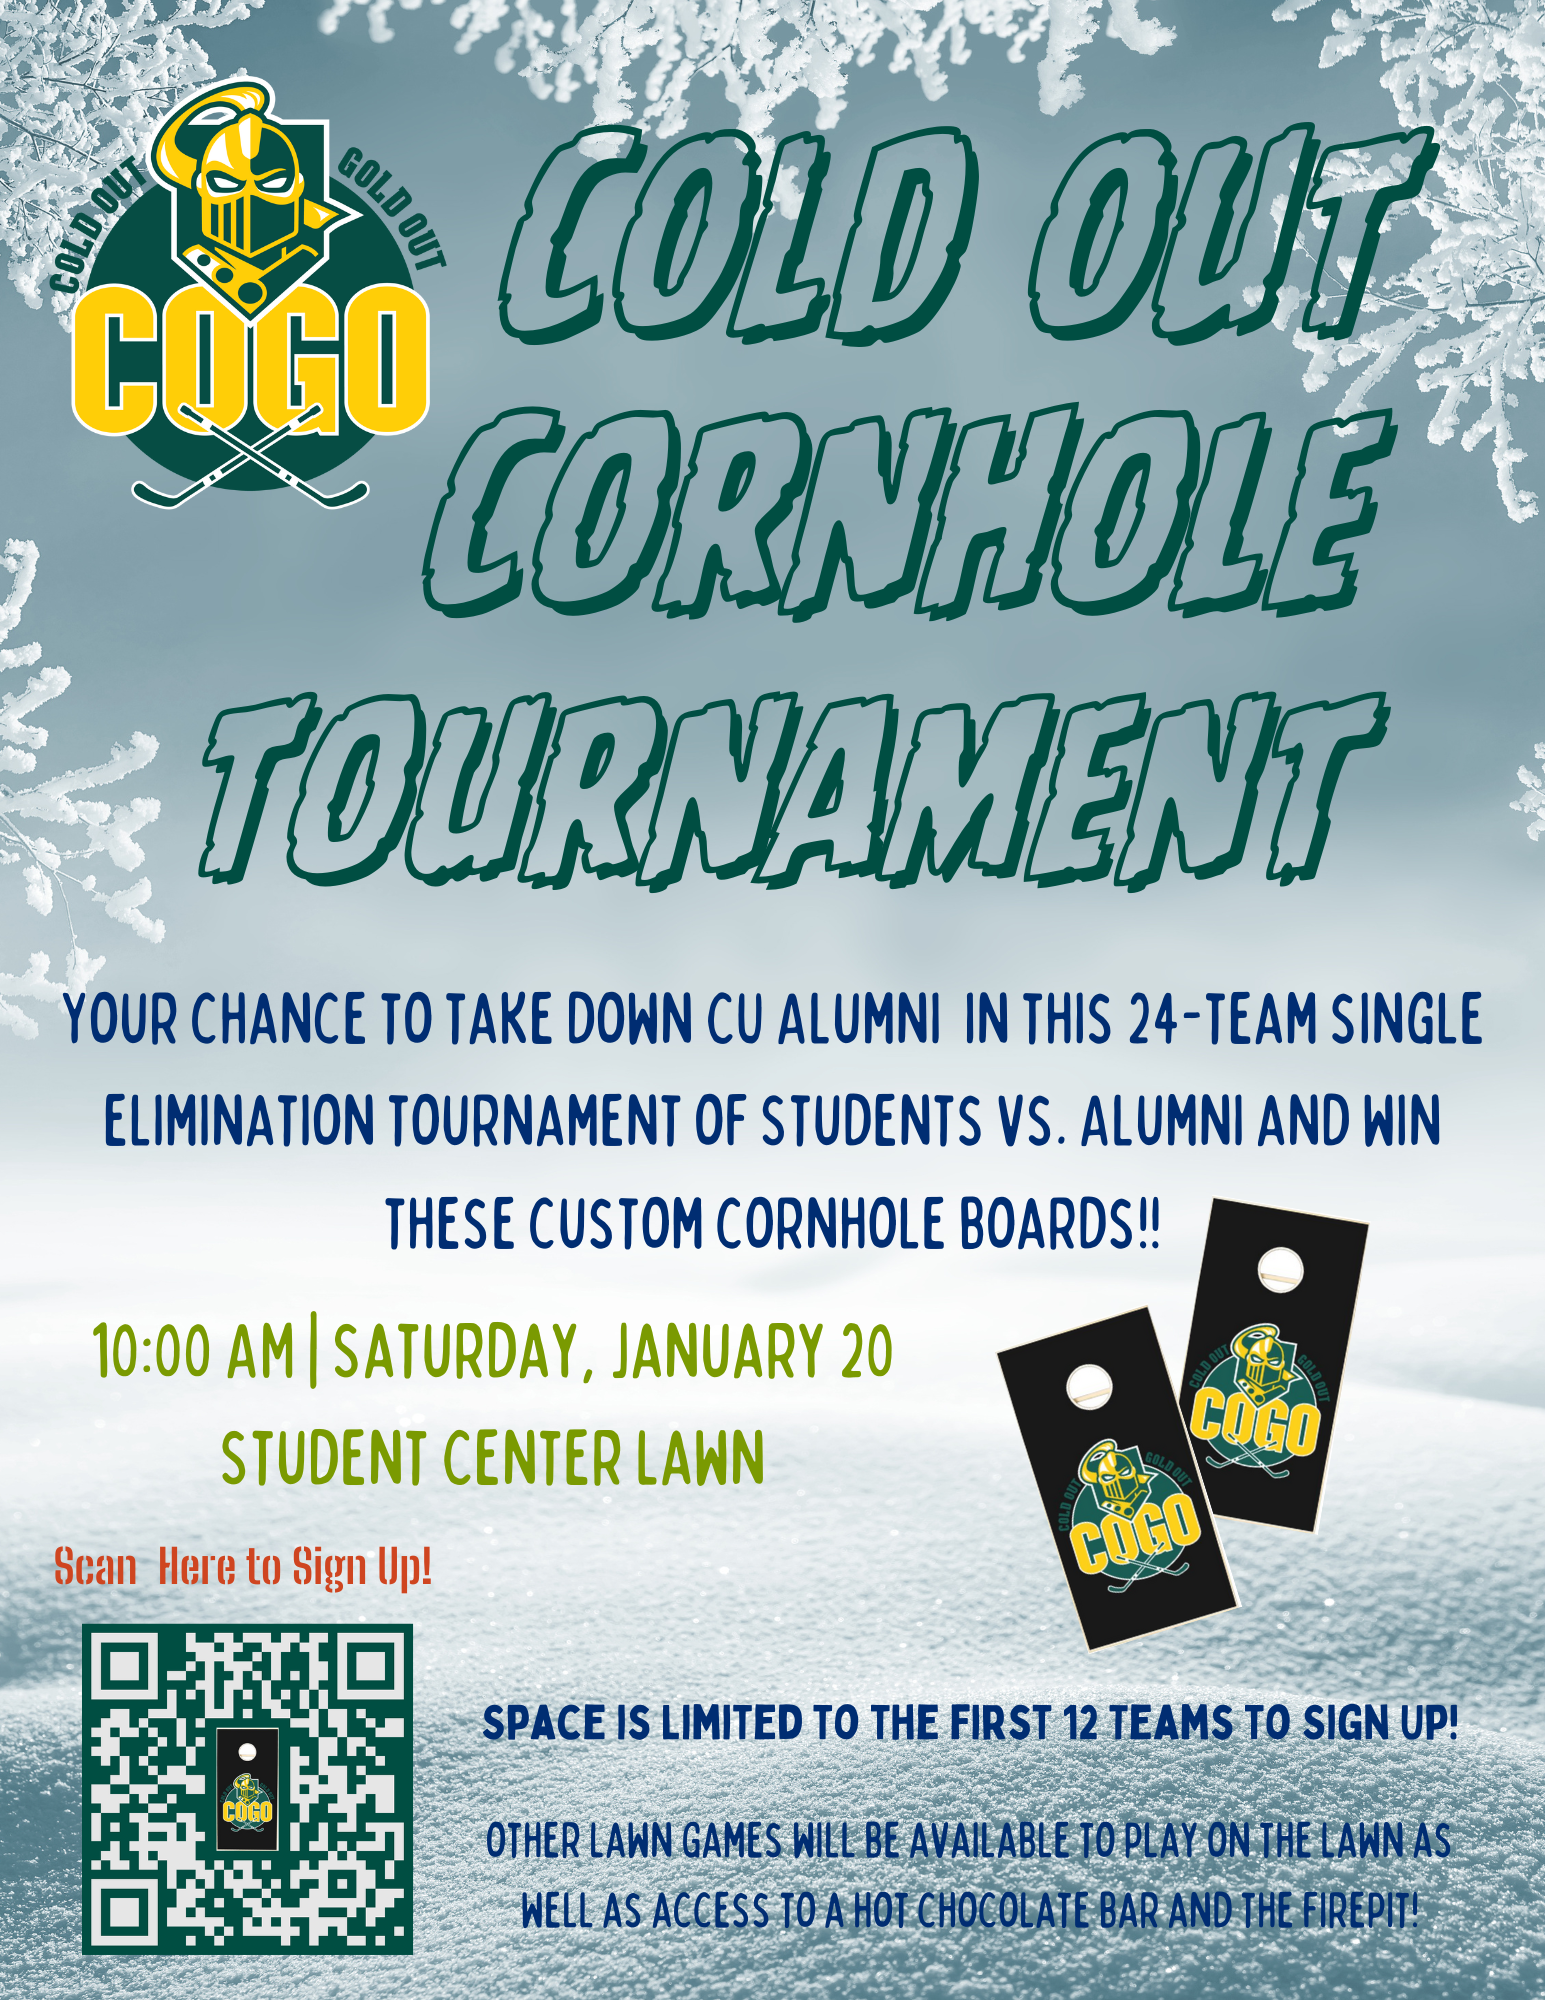 Gear up for Cold Out Gold Out (COGO) Games on Sat., January 20